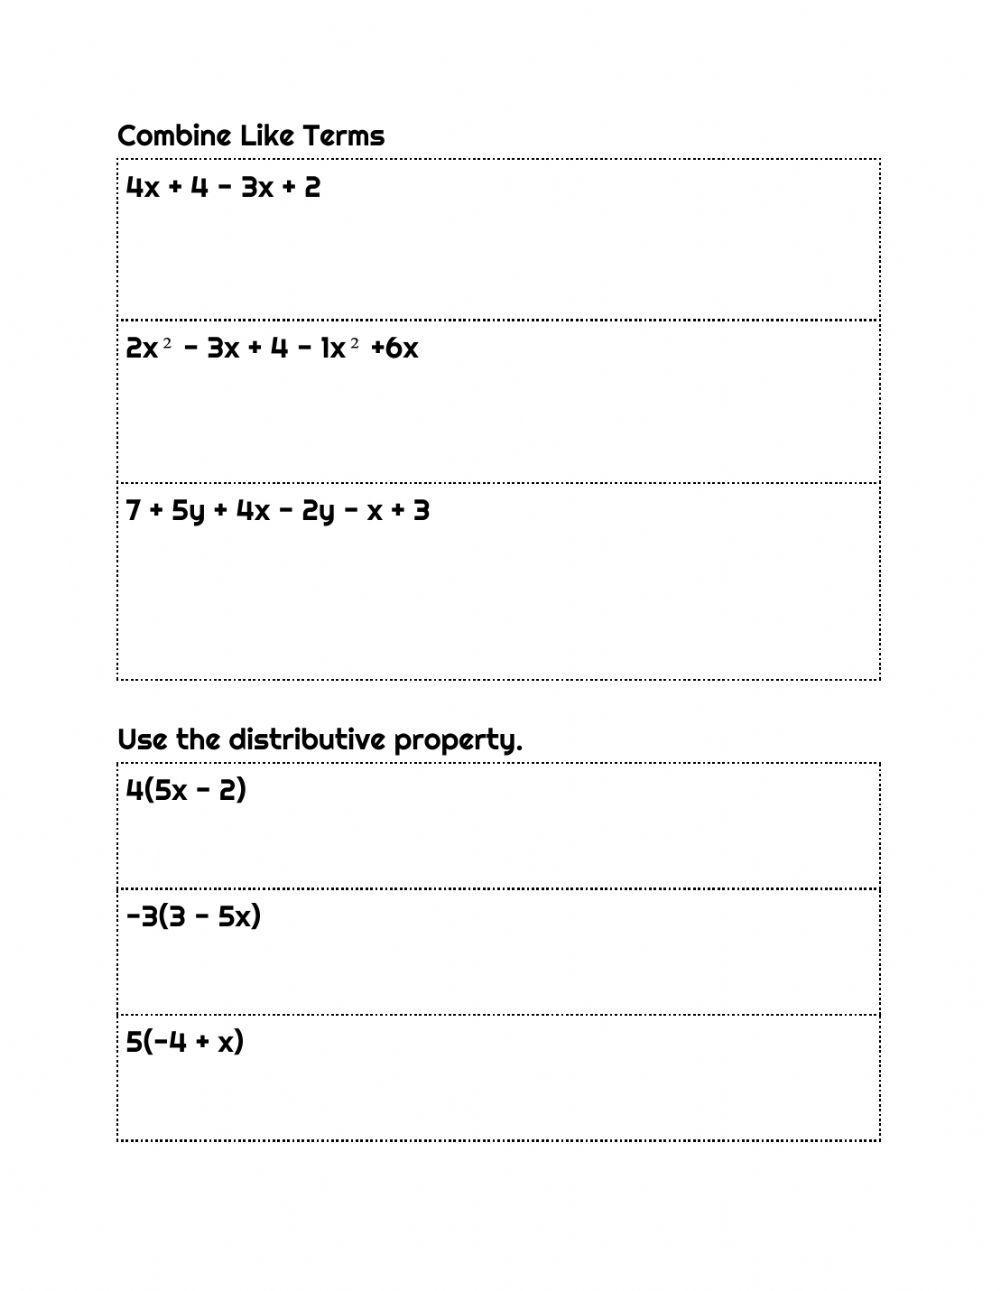 Evaluating Algebraic Expressions, Combining Like Terms, and Distributive Property Practice